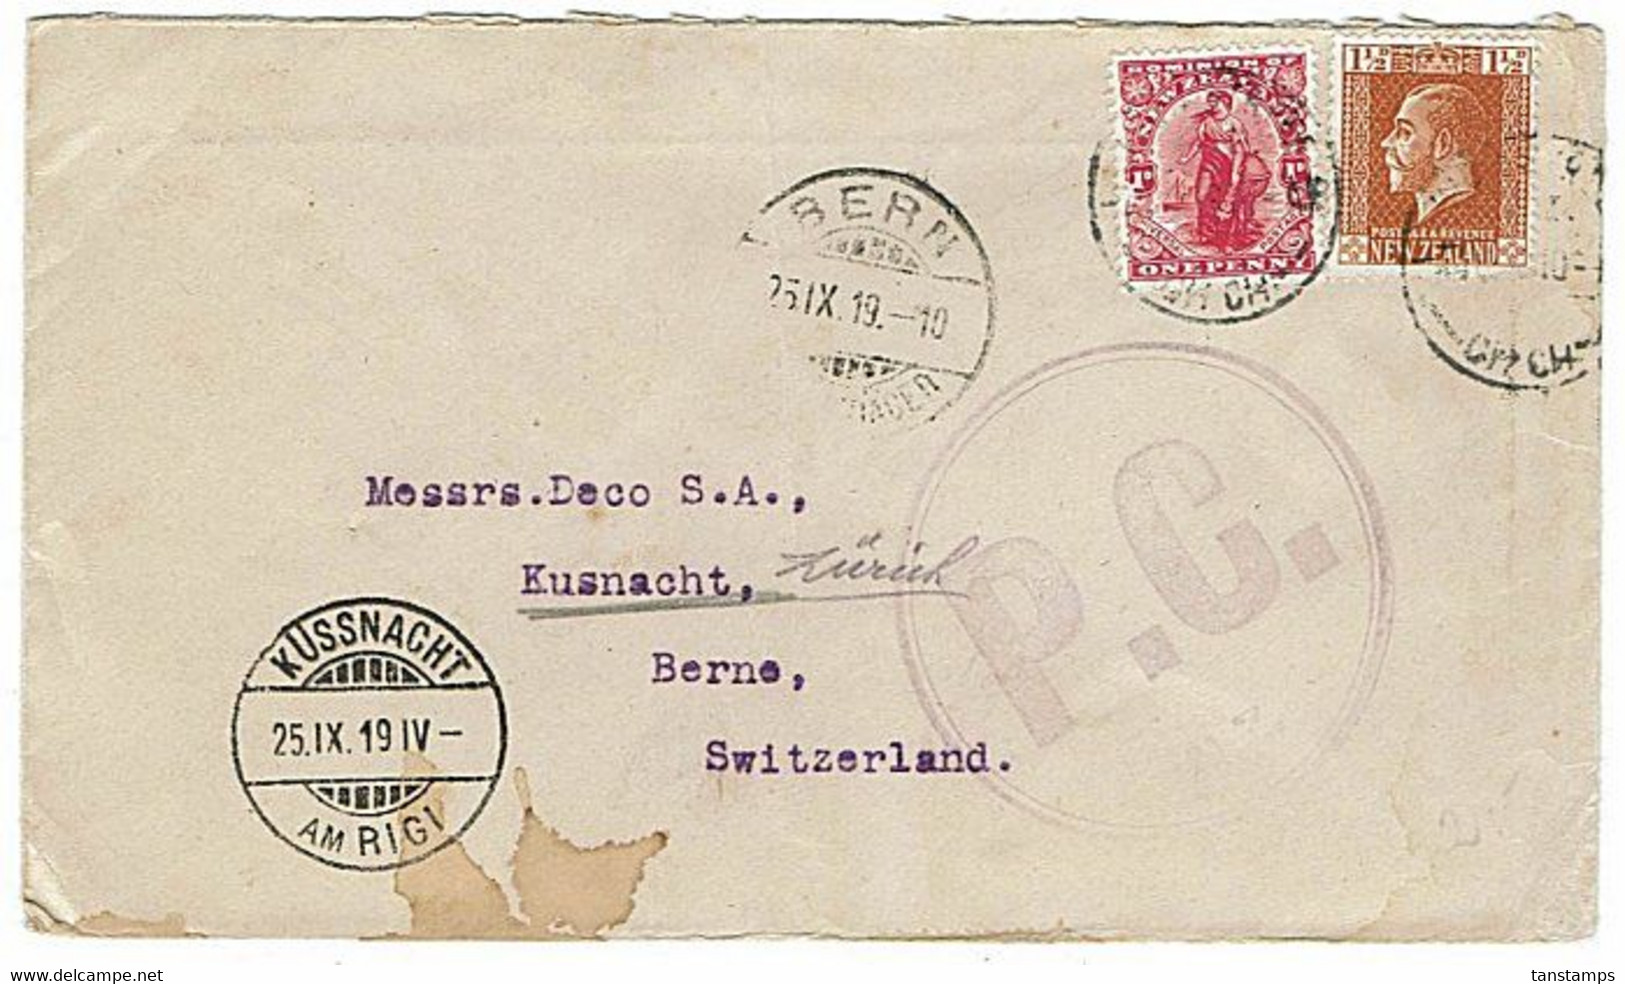 NEW ZEALAND - SWITZERLAND KGV PC CENSOR COVER - Lettres & Documents